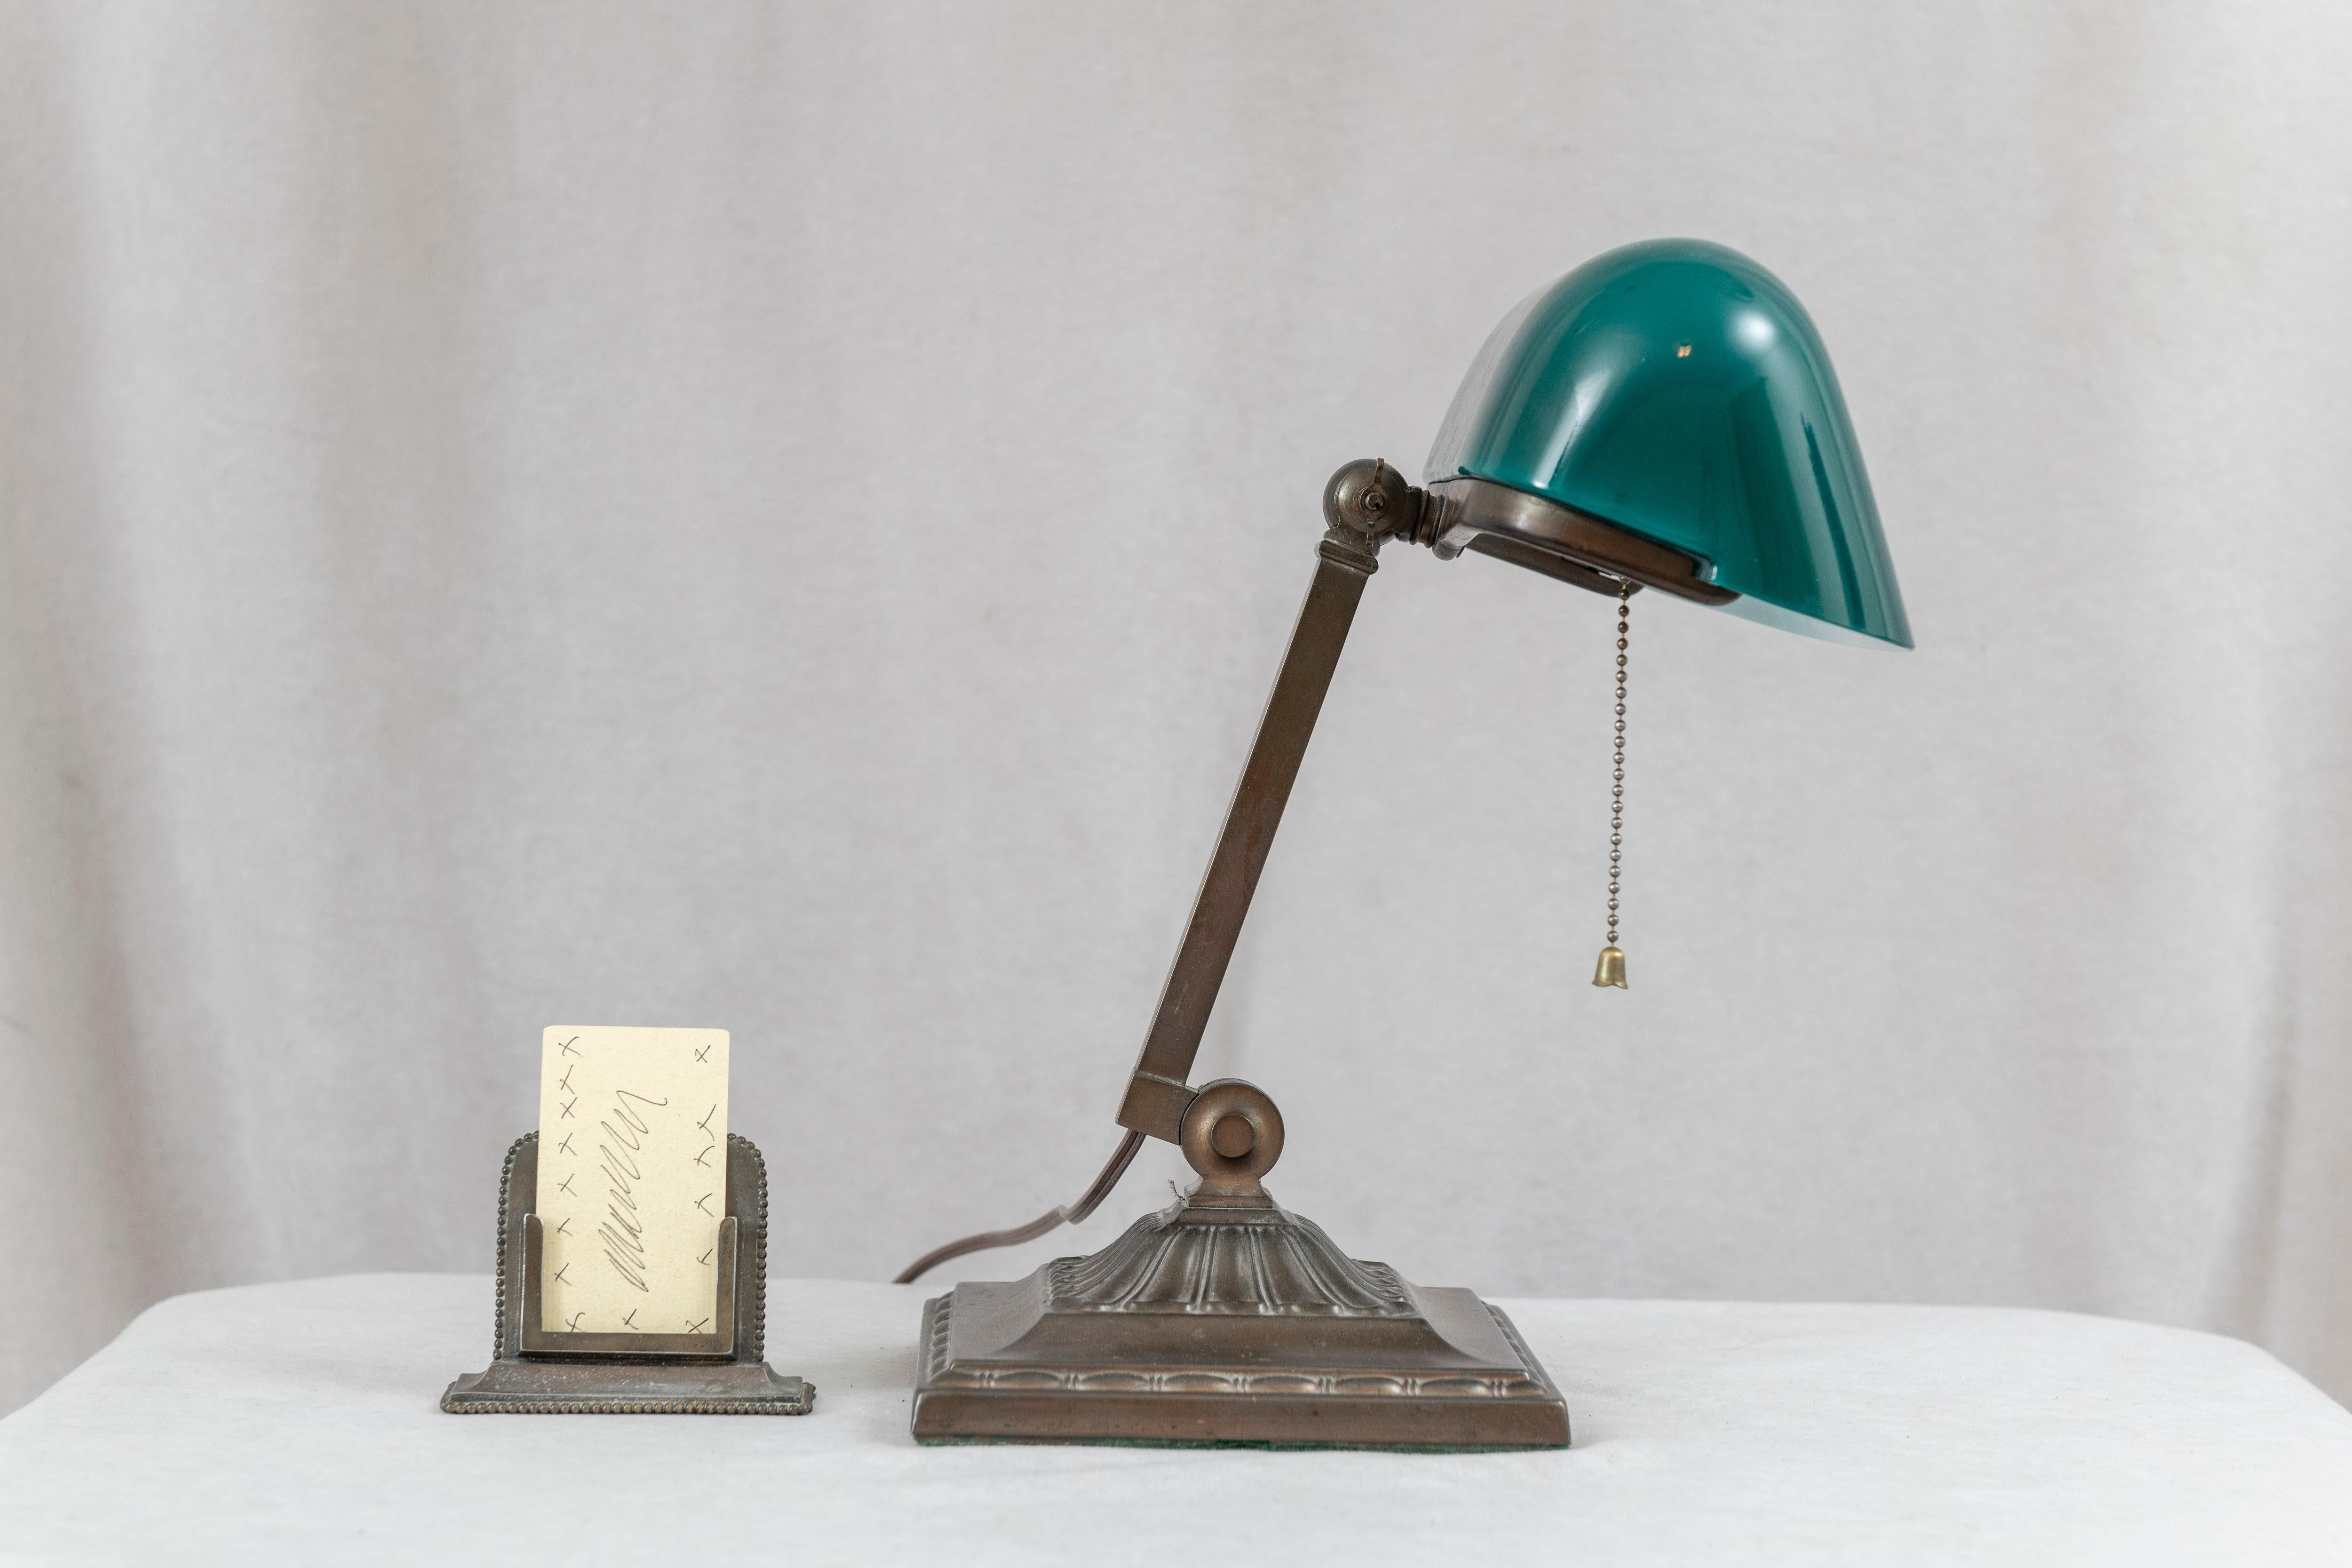  A very fine example of the genre known as banker's lamps. This example is signed by the most famous maker of these lamps, Emeralite. The shade is the original with no damage. These shades were made in 2 layers, known as cased glass. The inside